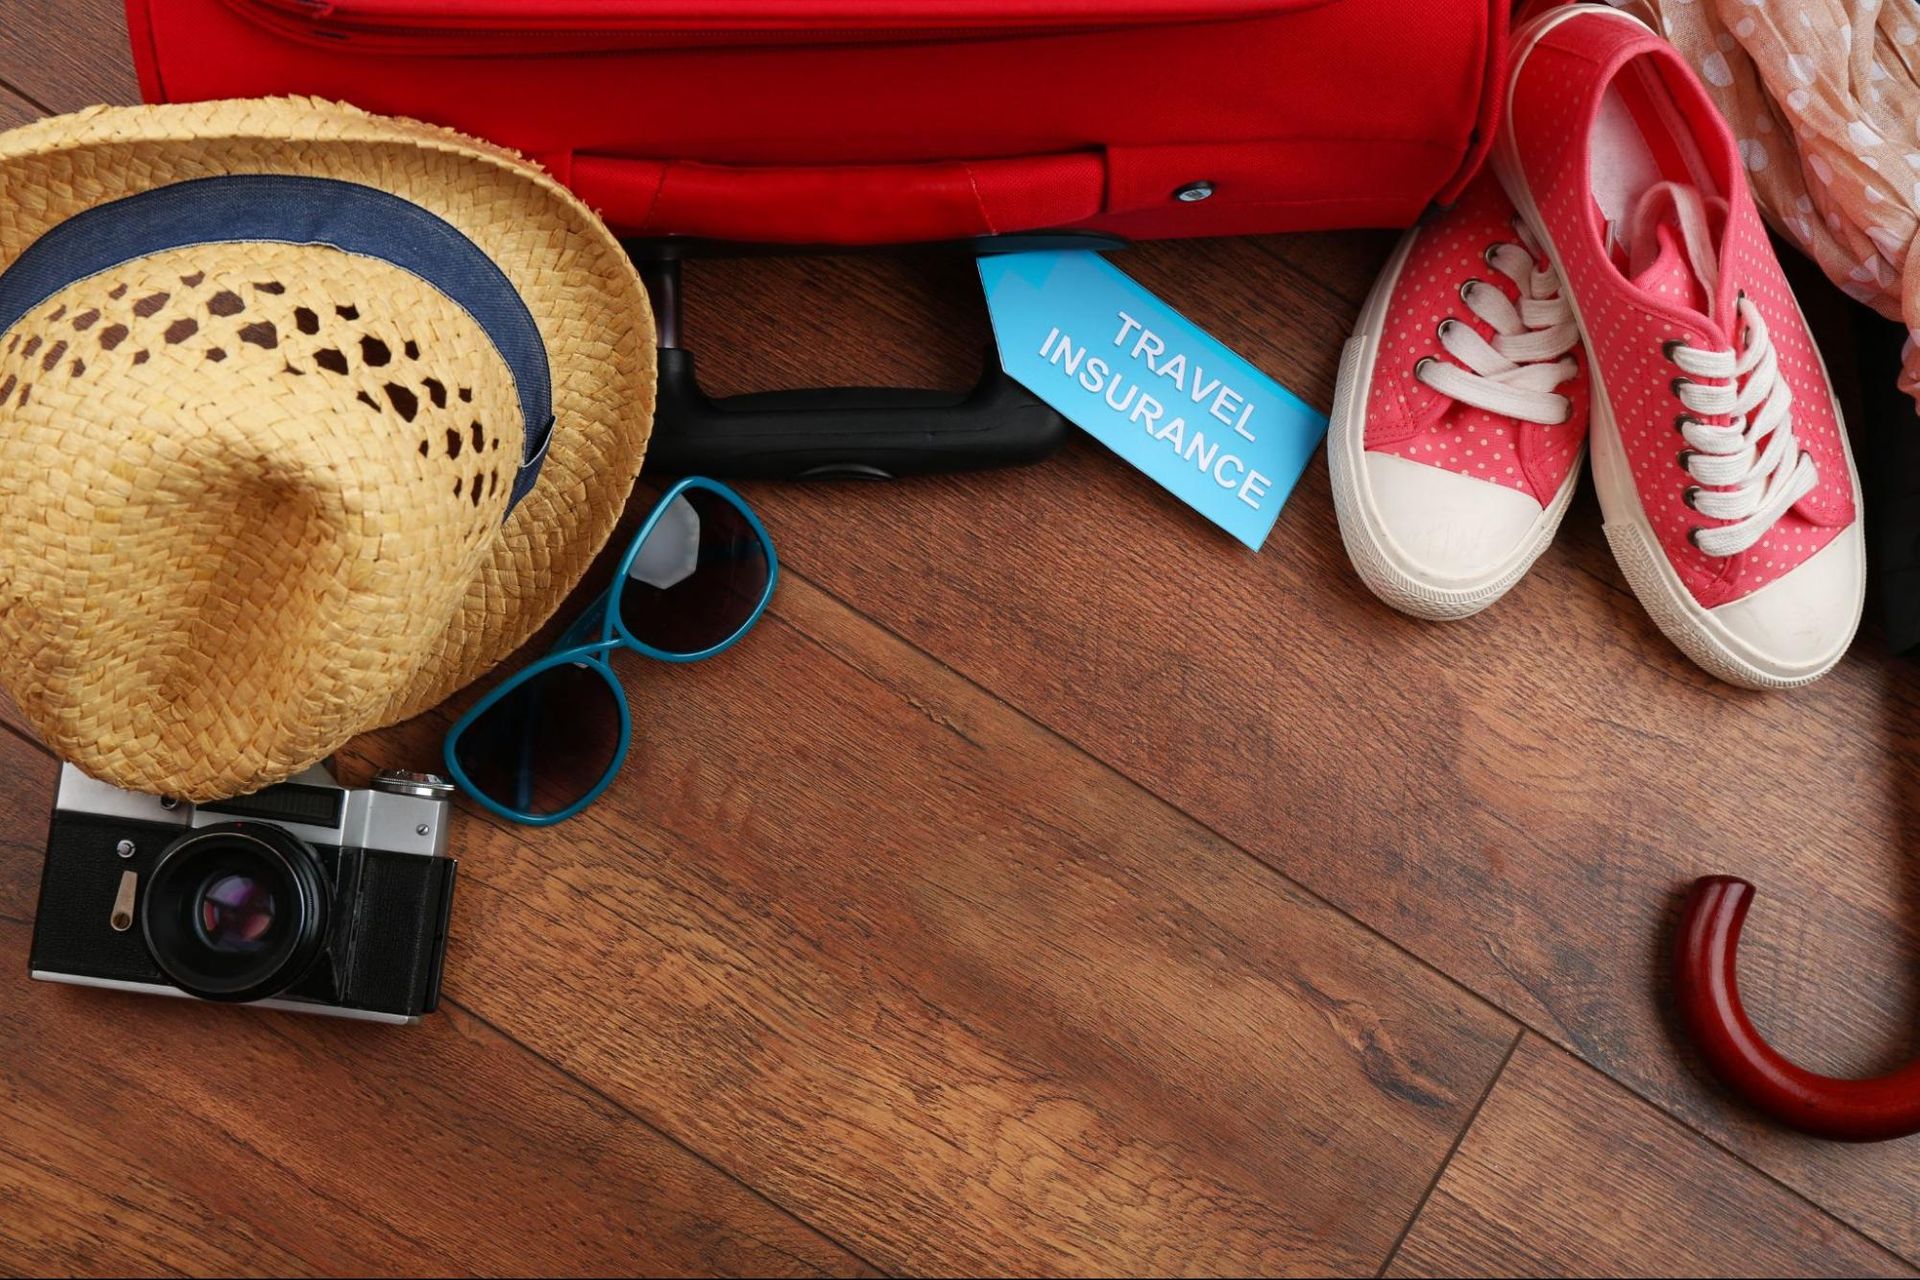 Travel supplies and luggage with "travel insurance" tag